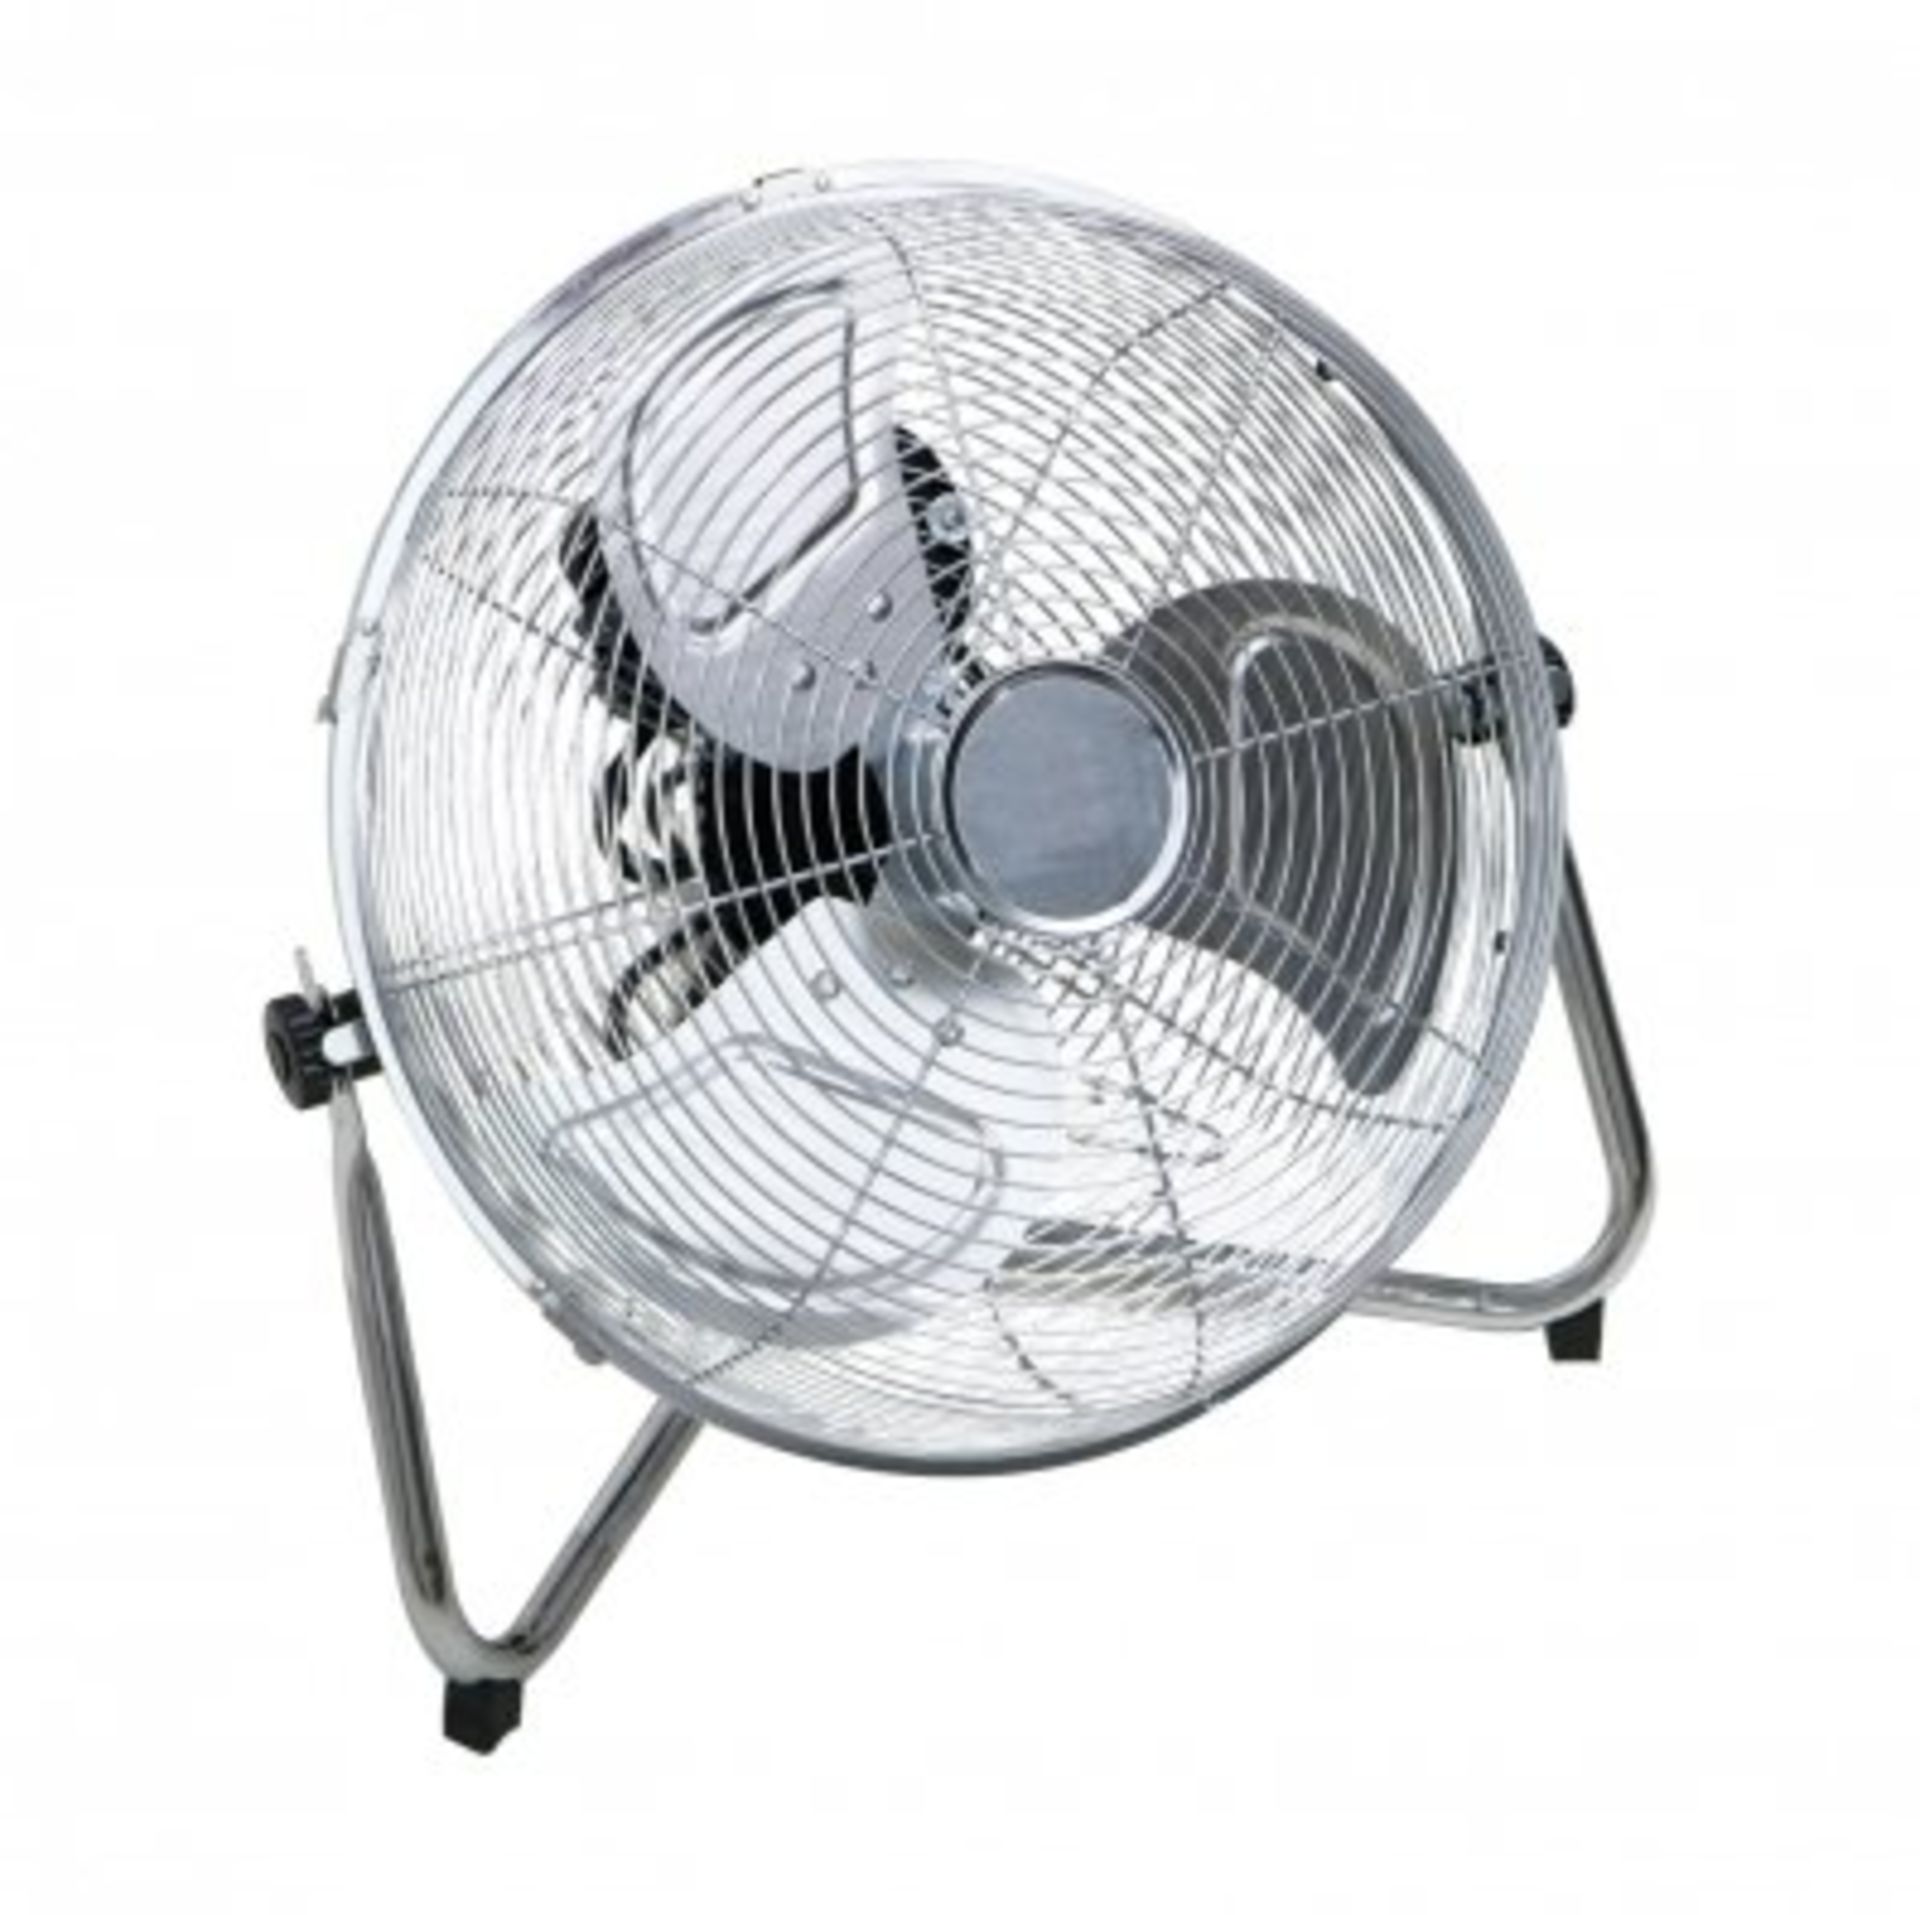 (LF11) 12" Inch Chrome 3 Speed Floor Standing Gym Fan Hydroponic Stay cool this year with th...